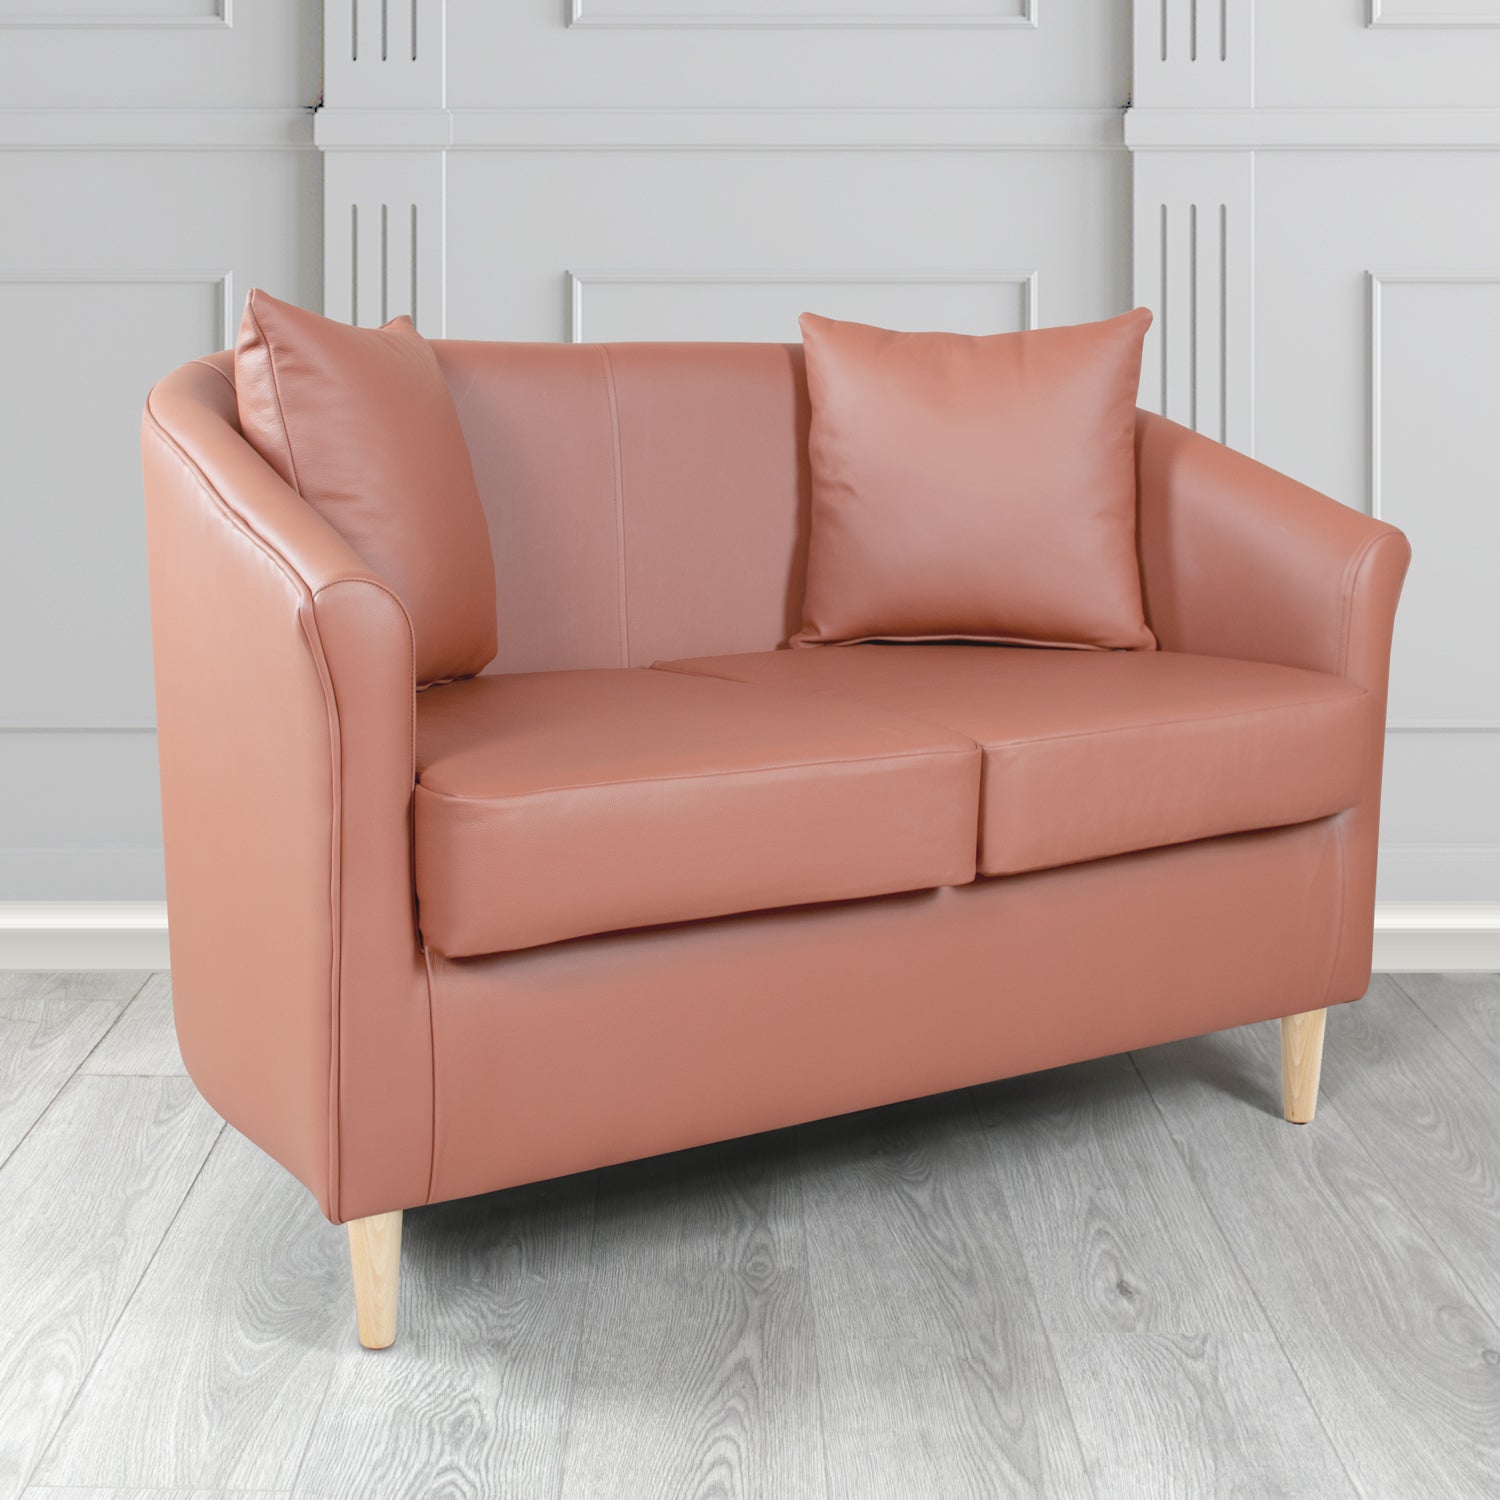 St Tropez Shelly Brick Red Crib 5 Genuine Leather 2 Seater Tub Sofa with Scatter Cushions - The Tub Chair Shop